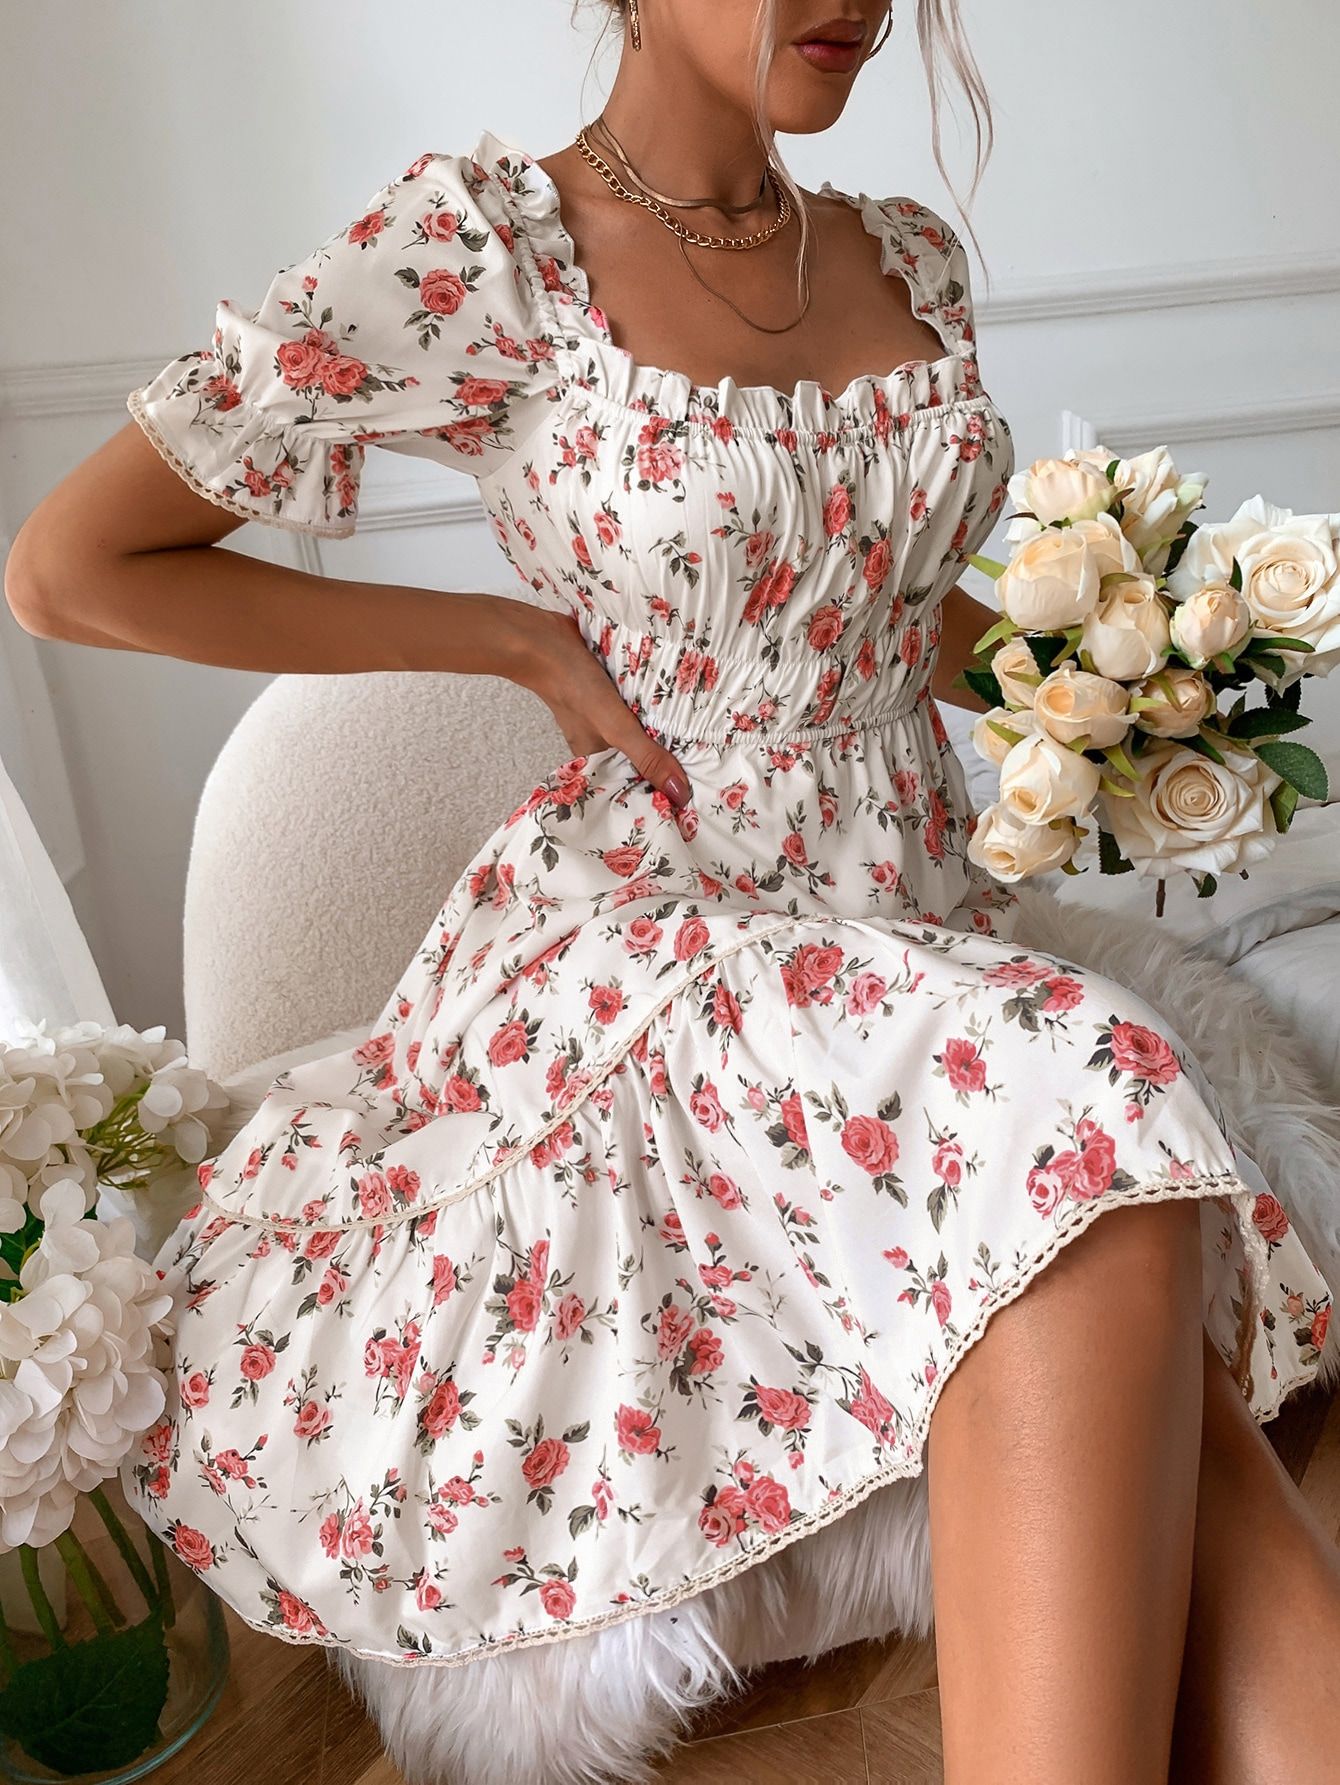 Make your choice for floral print dresses conveniently